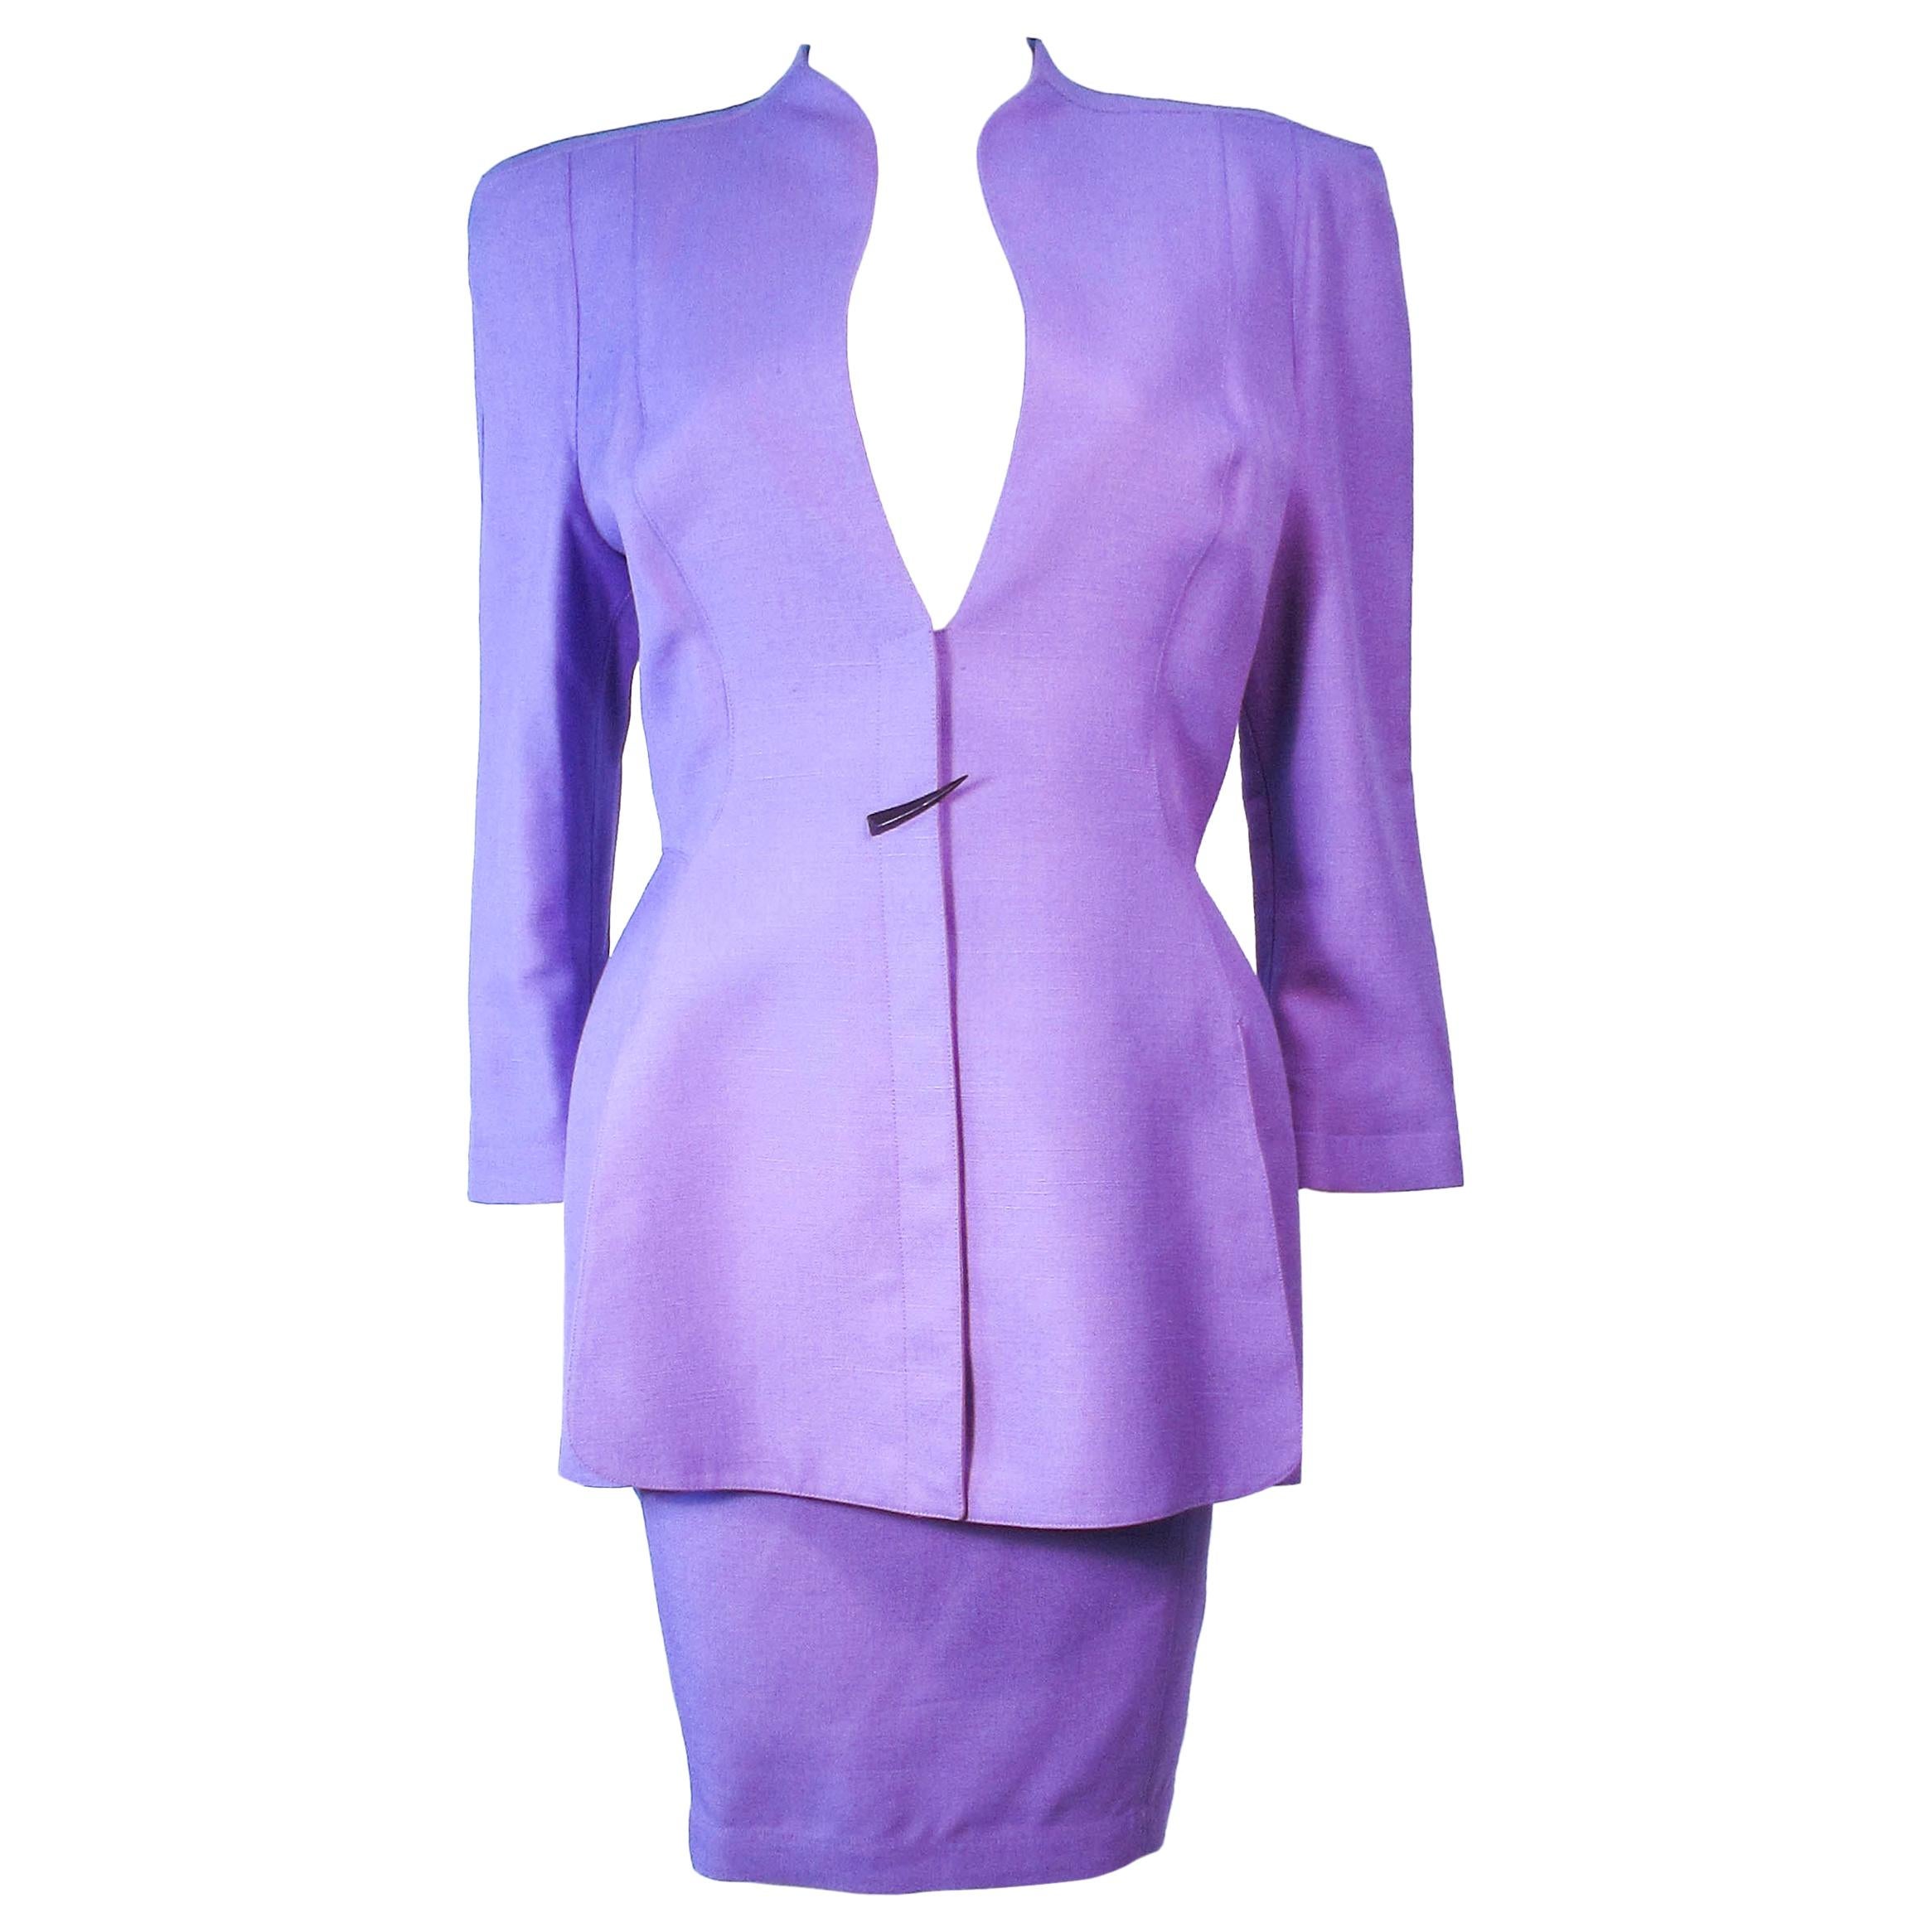 THIERRY MUGLER Fred Heyman Lavender 2pc Skirt Suit with Abstract Closure Size 42